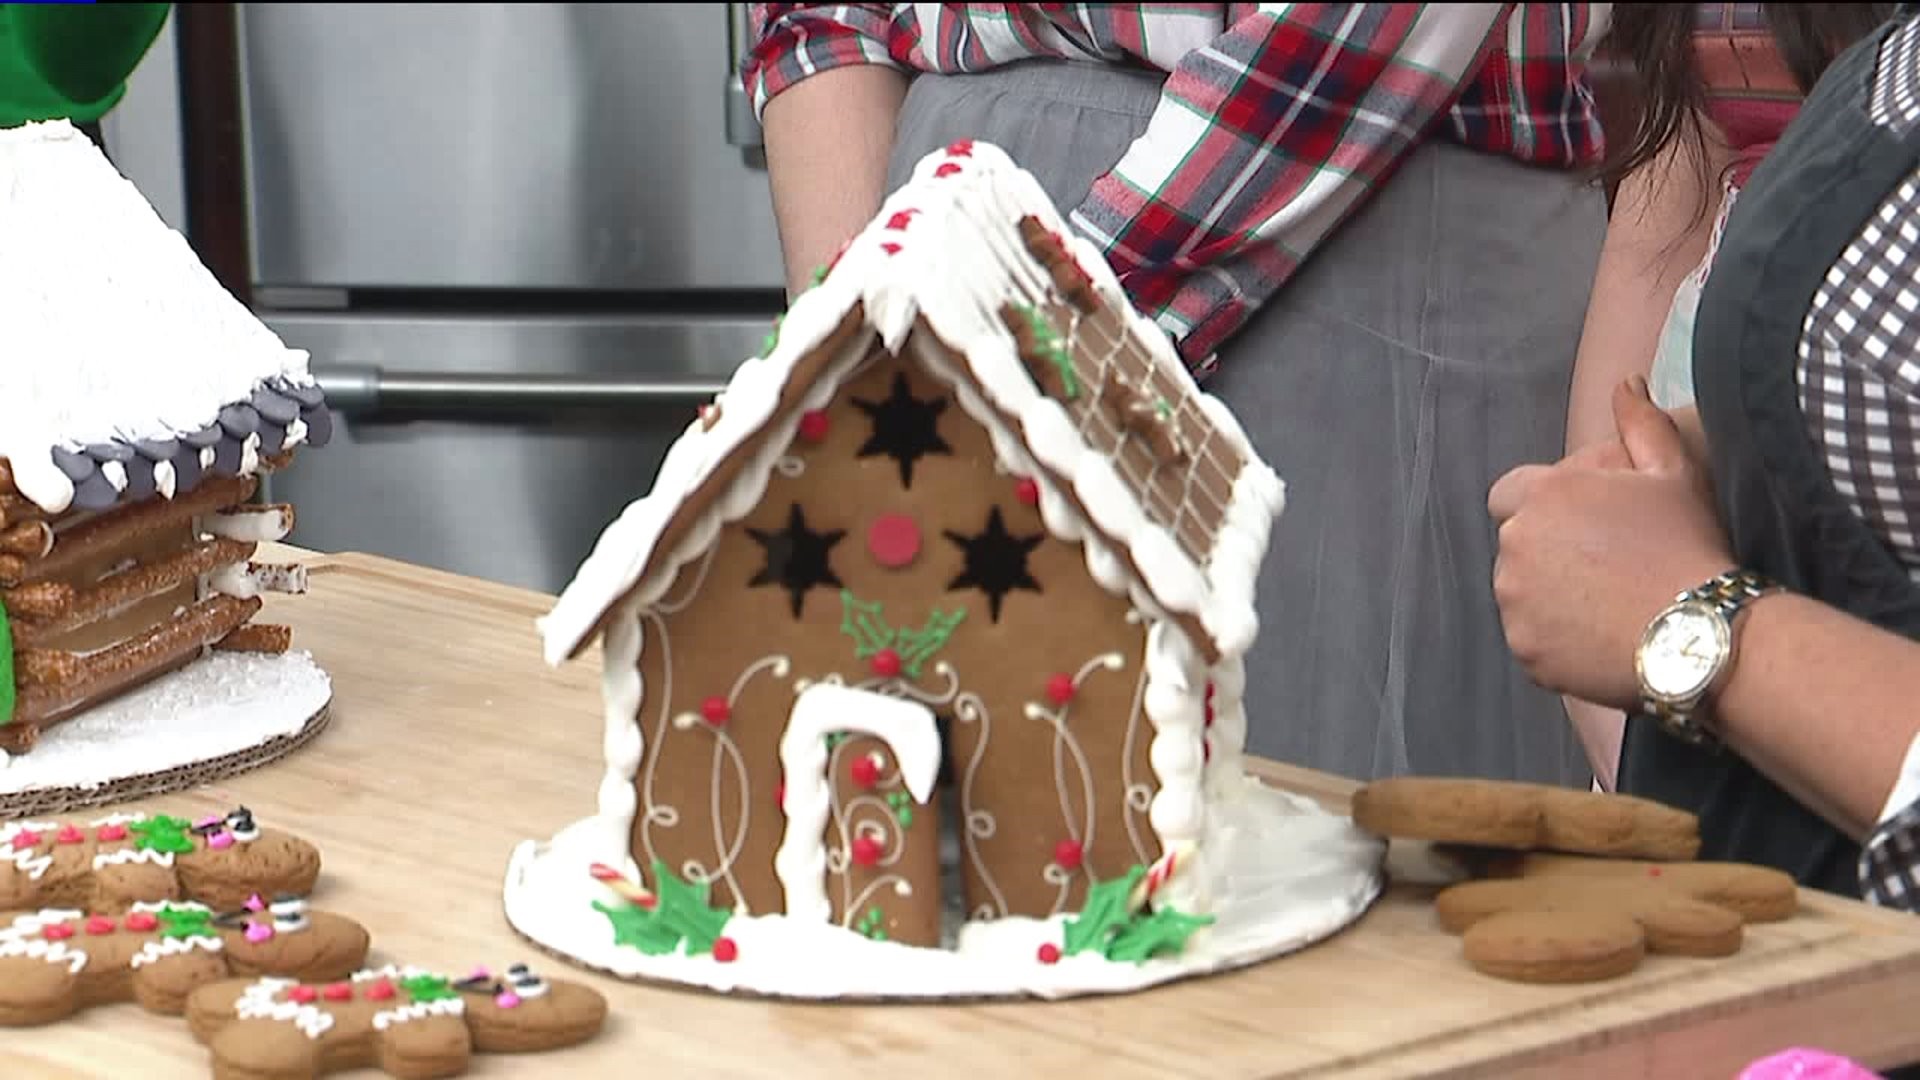 Best Local Bakers Show Us How To Make Gingerbread Houses